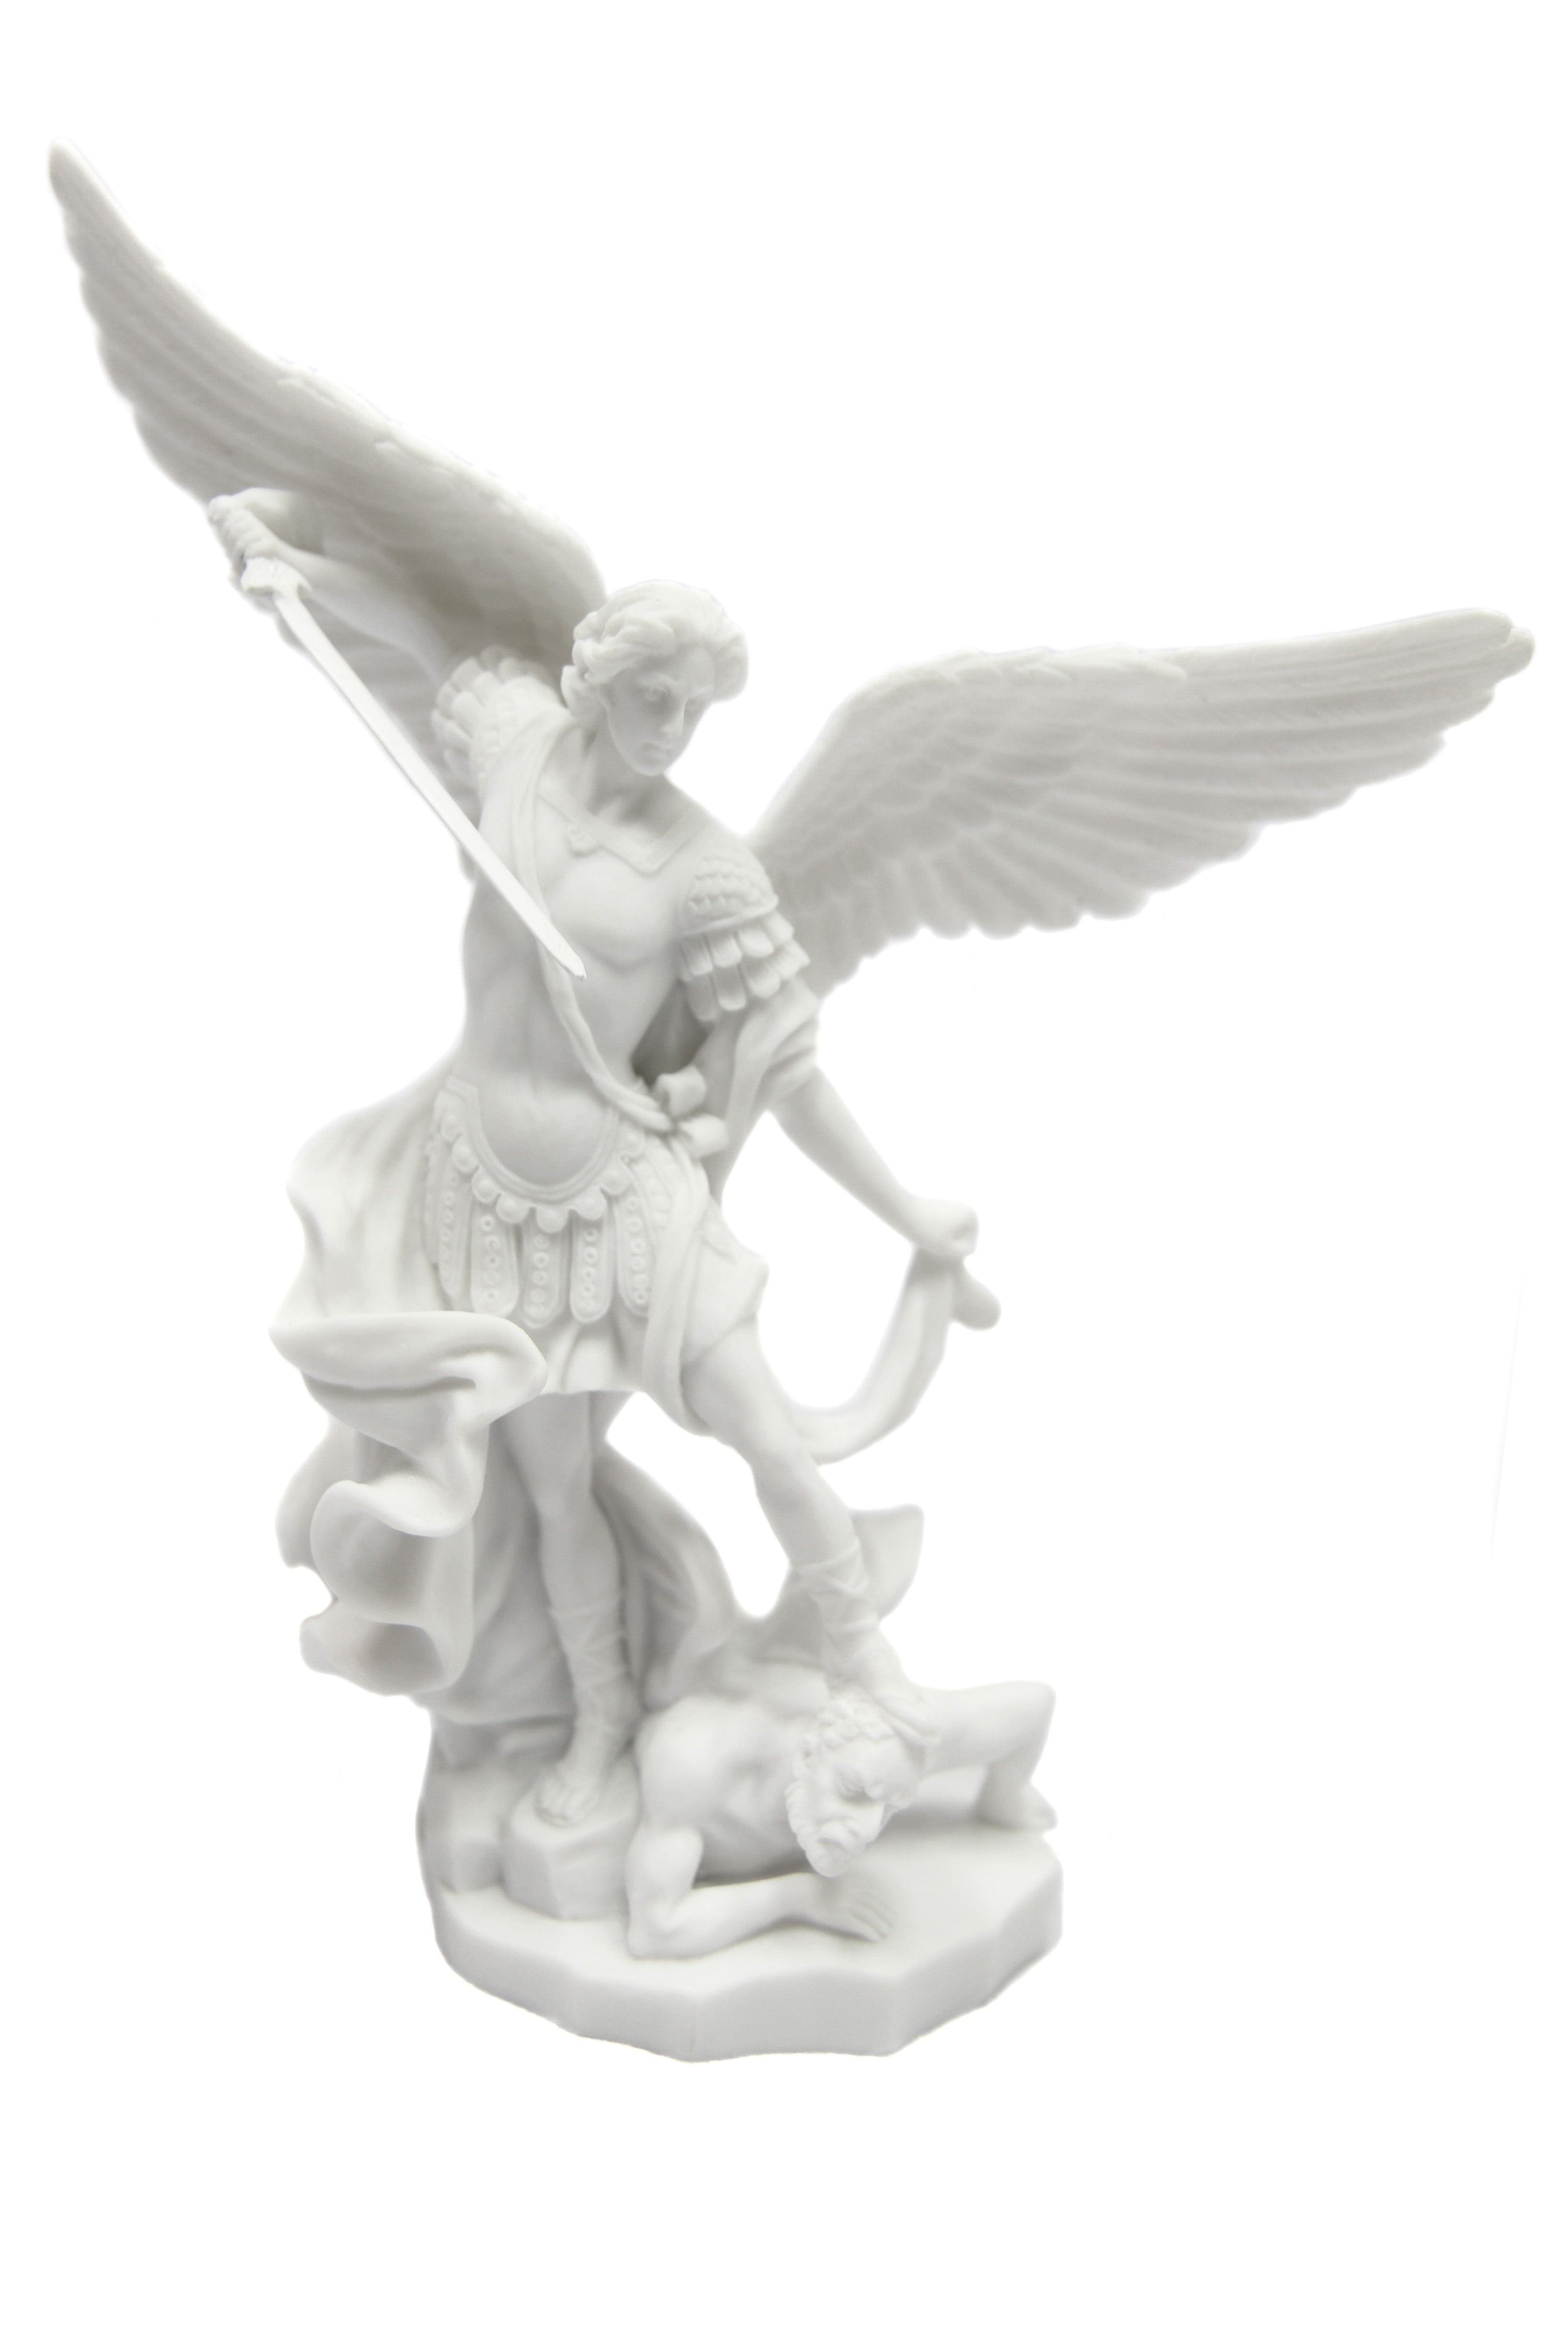 7.5 Inch Saint St Michael Archangel Statue Sculpture Vittoria Collection Made in Italy